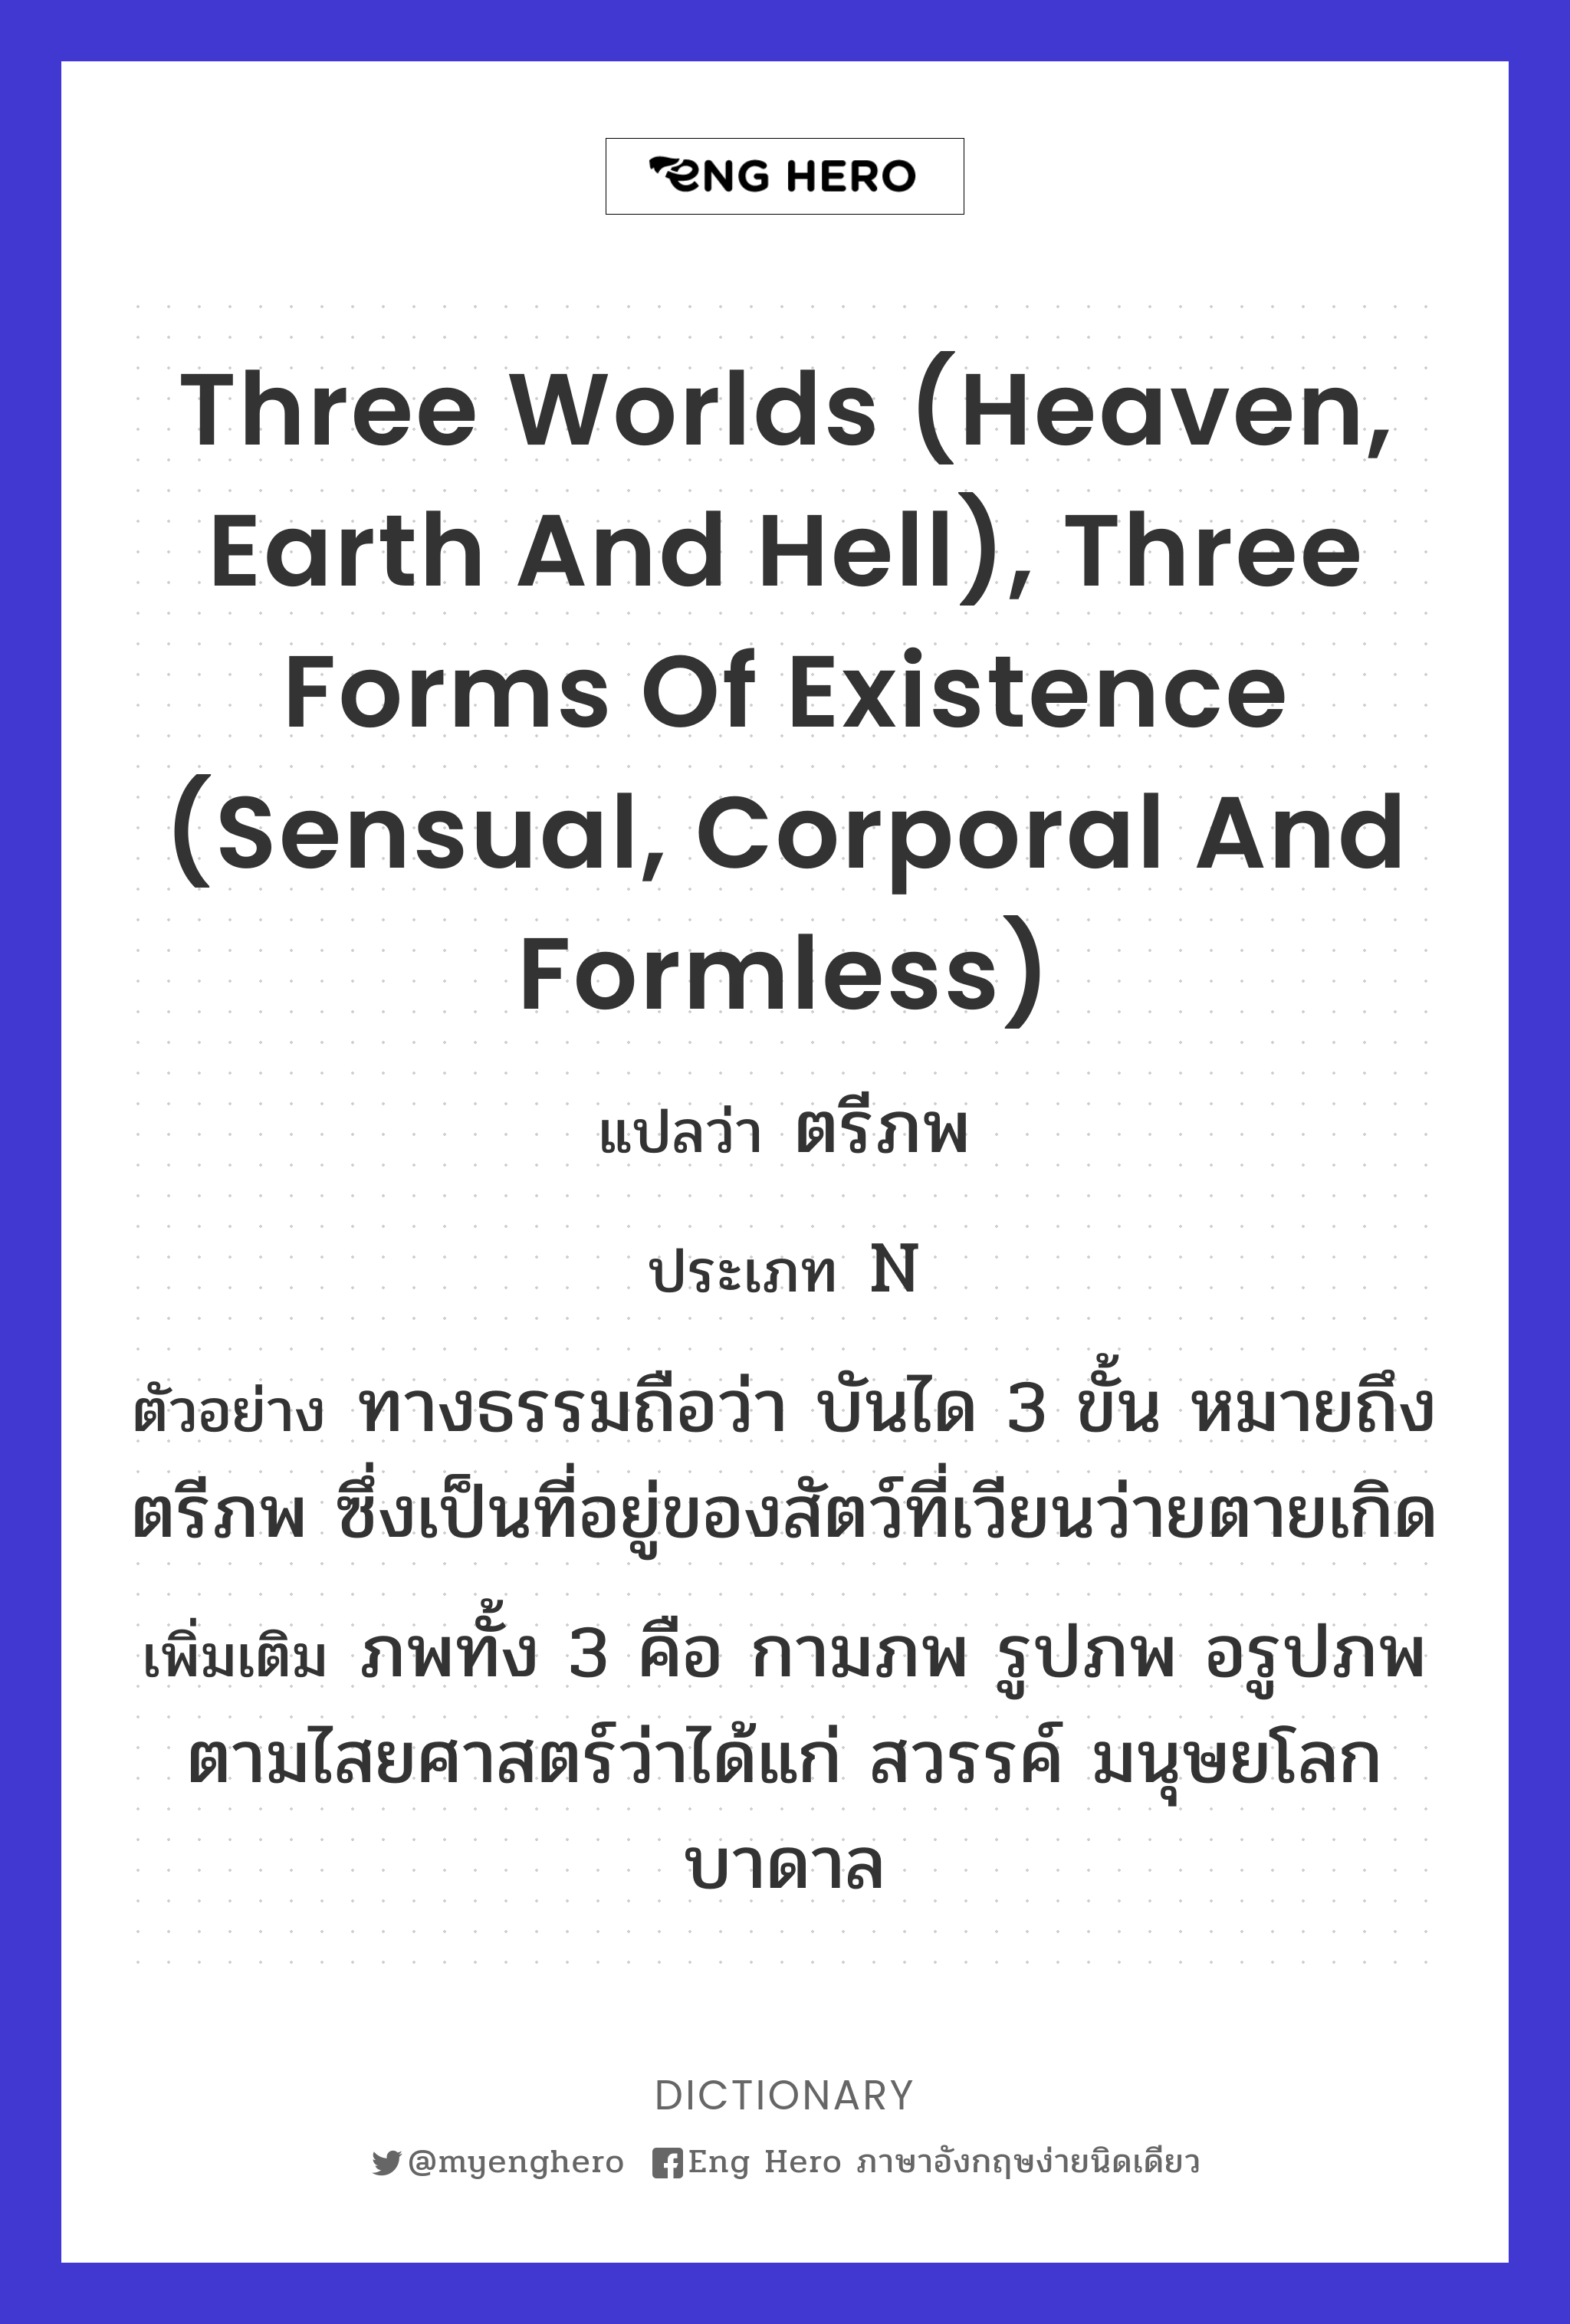 three worlds (heaven, earth and hell), three forms of existence (sensual, corporal and formless)